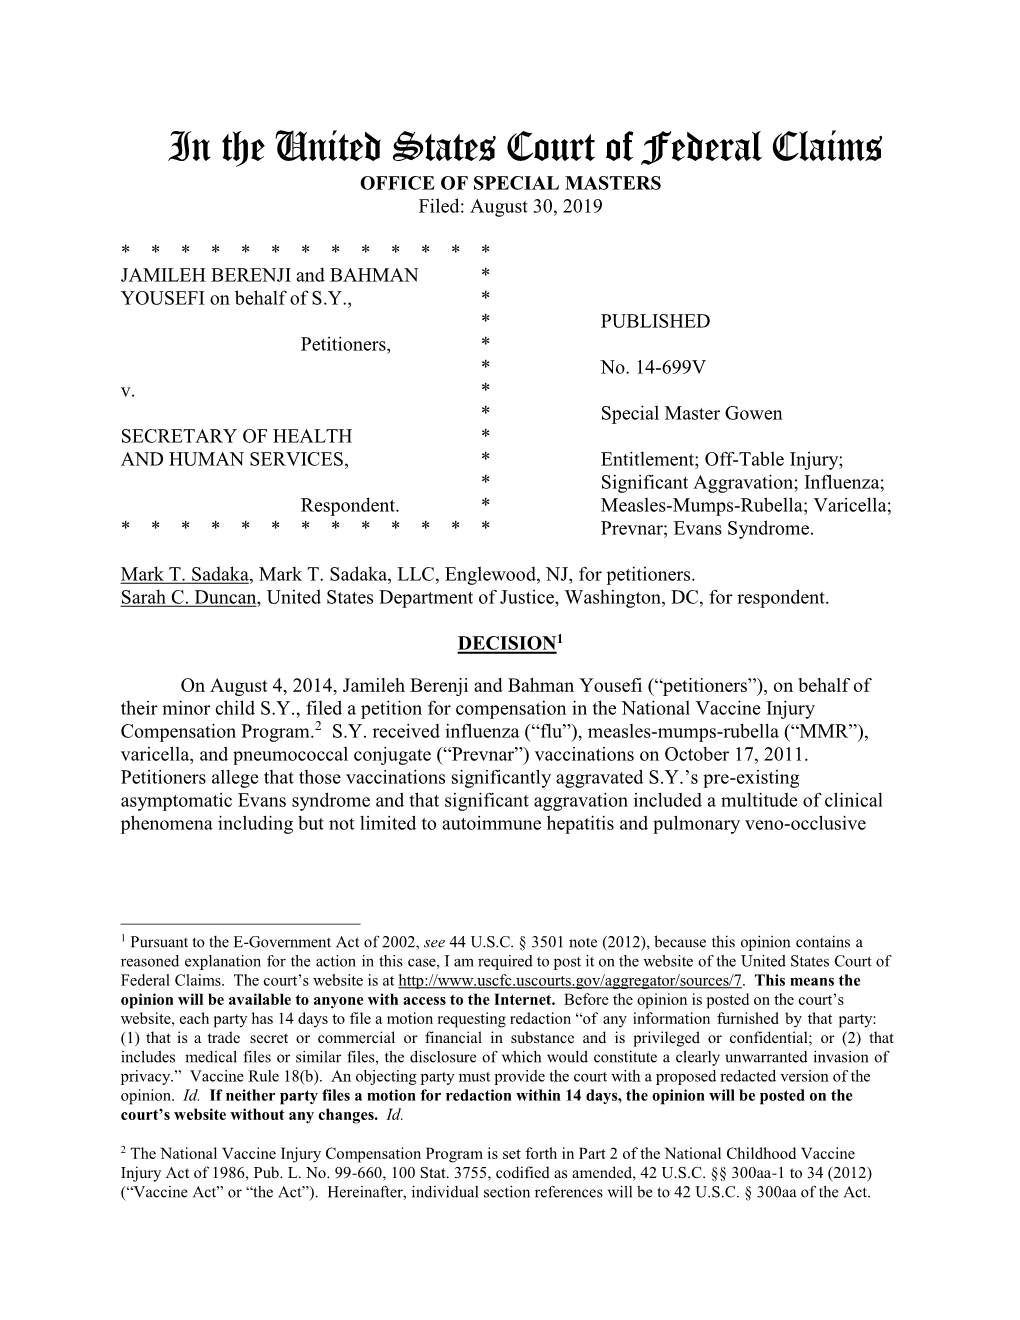 In the United States Court of Federal Claims OFFICE of SPECIAL MASTERS Filed: August 30, 2019